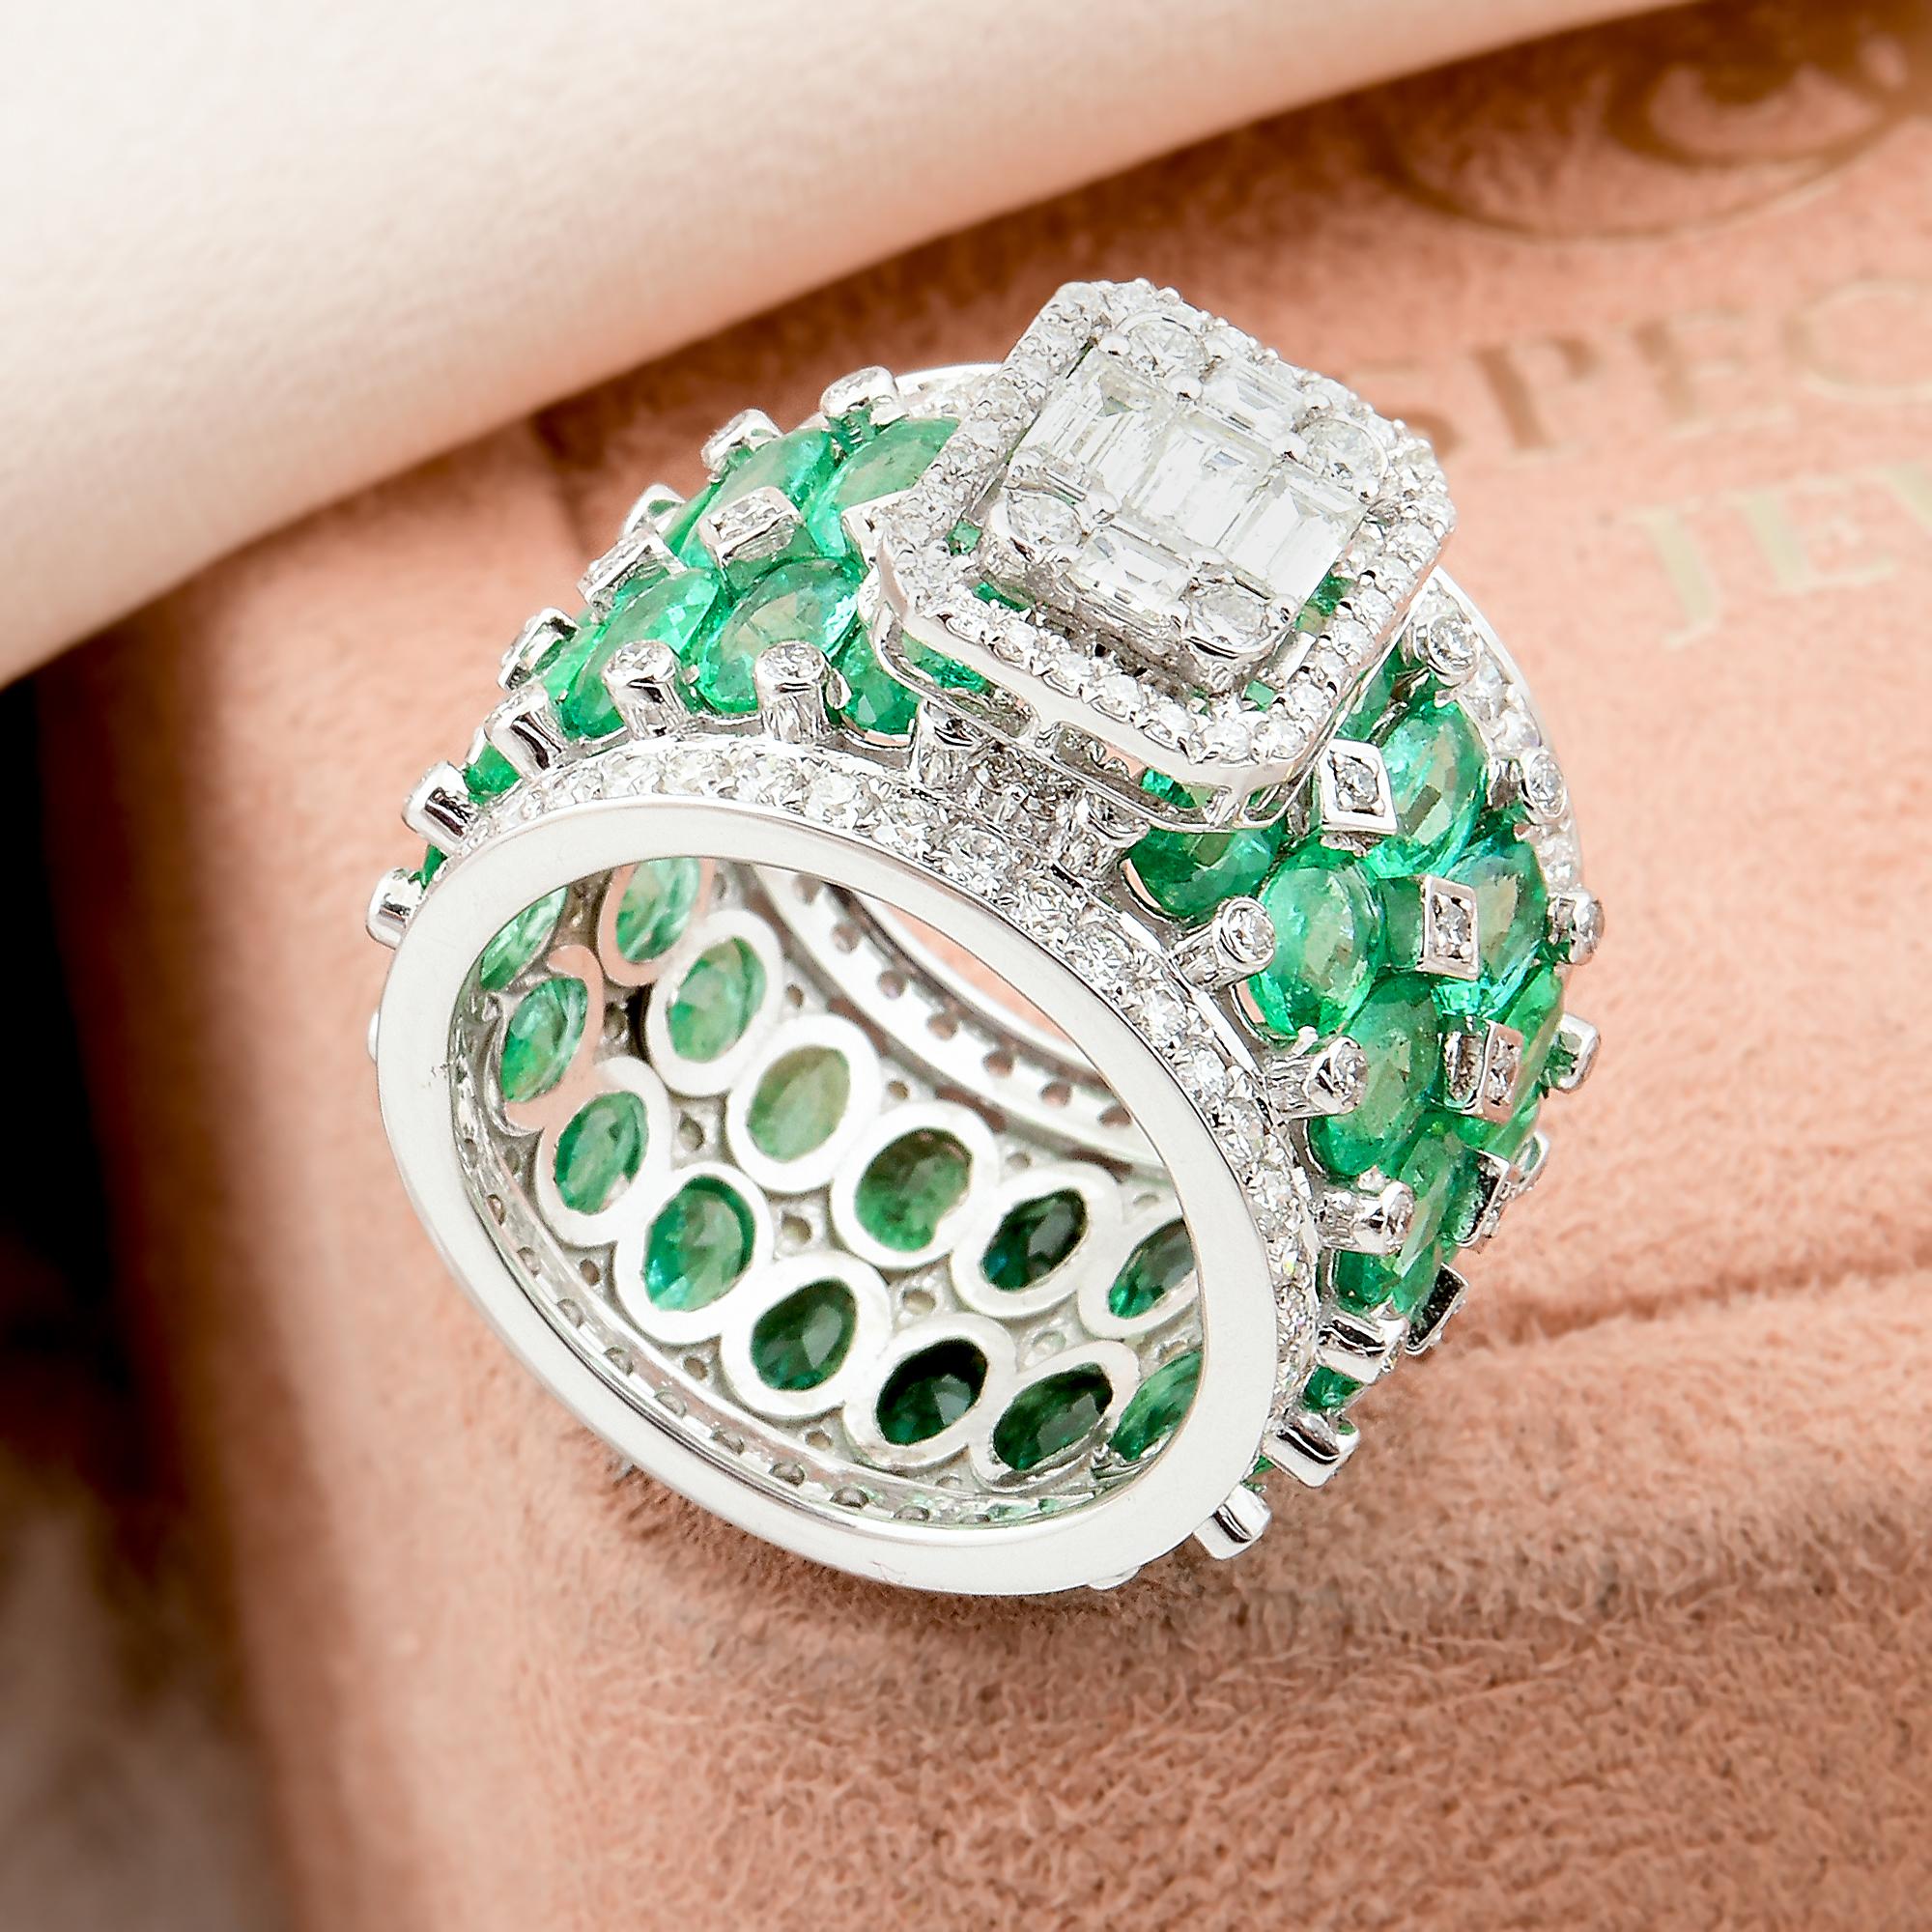 For Sale:  Oval Natural Emerald Gemstone Band Ring Baguette Diamond 18k White Gold Jewelry 4